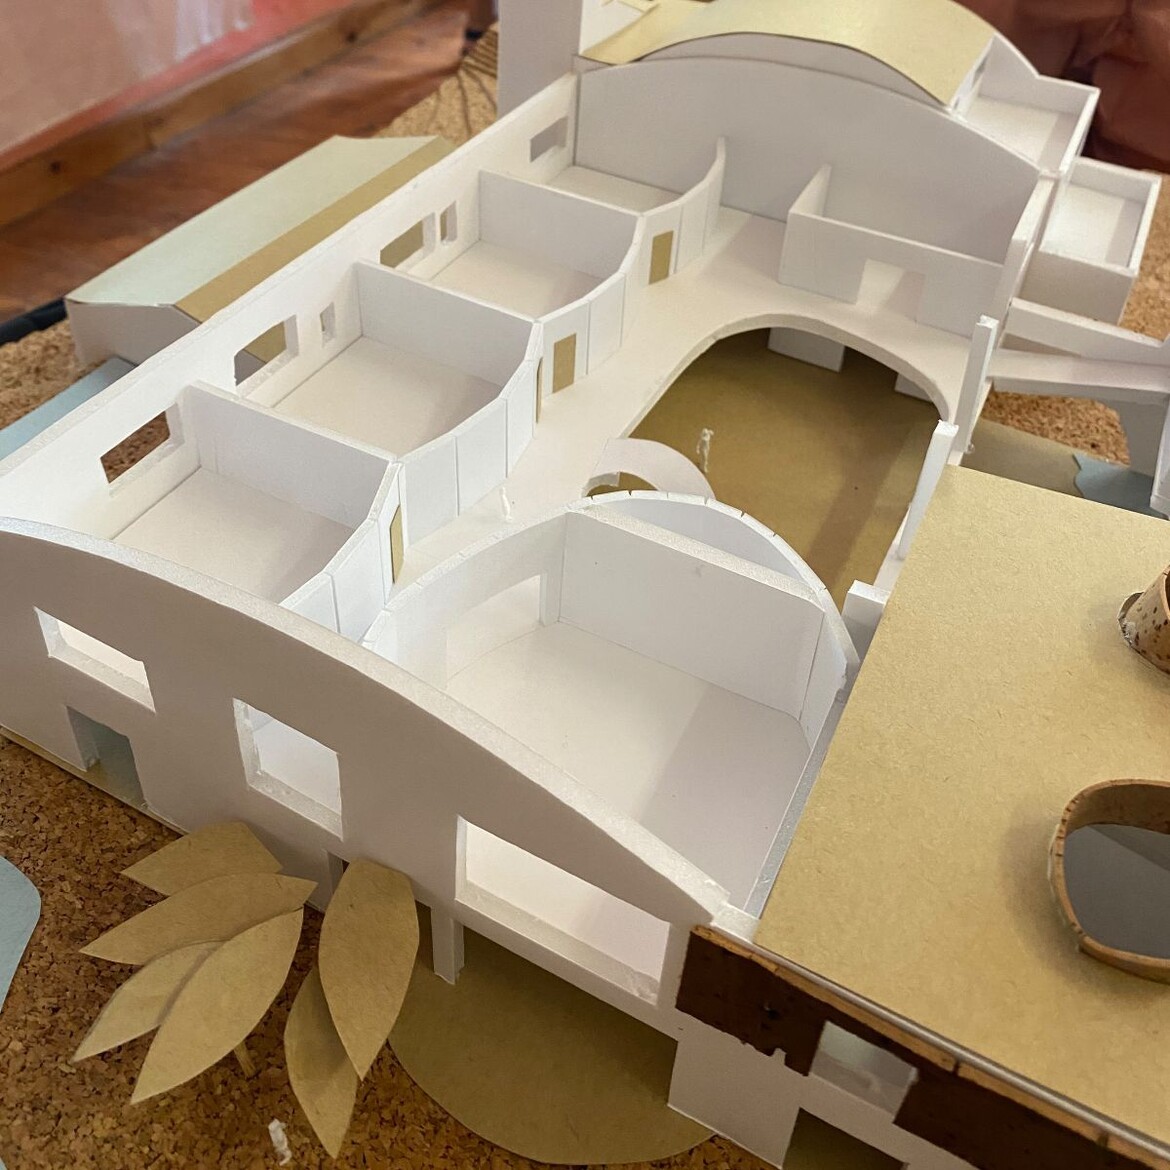 Architectural Model showing the future classrooms inside of the warehouse